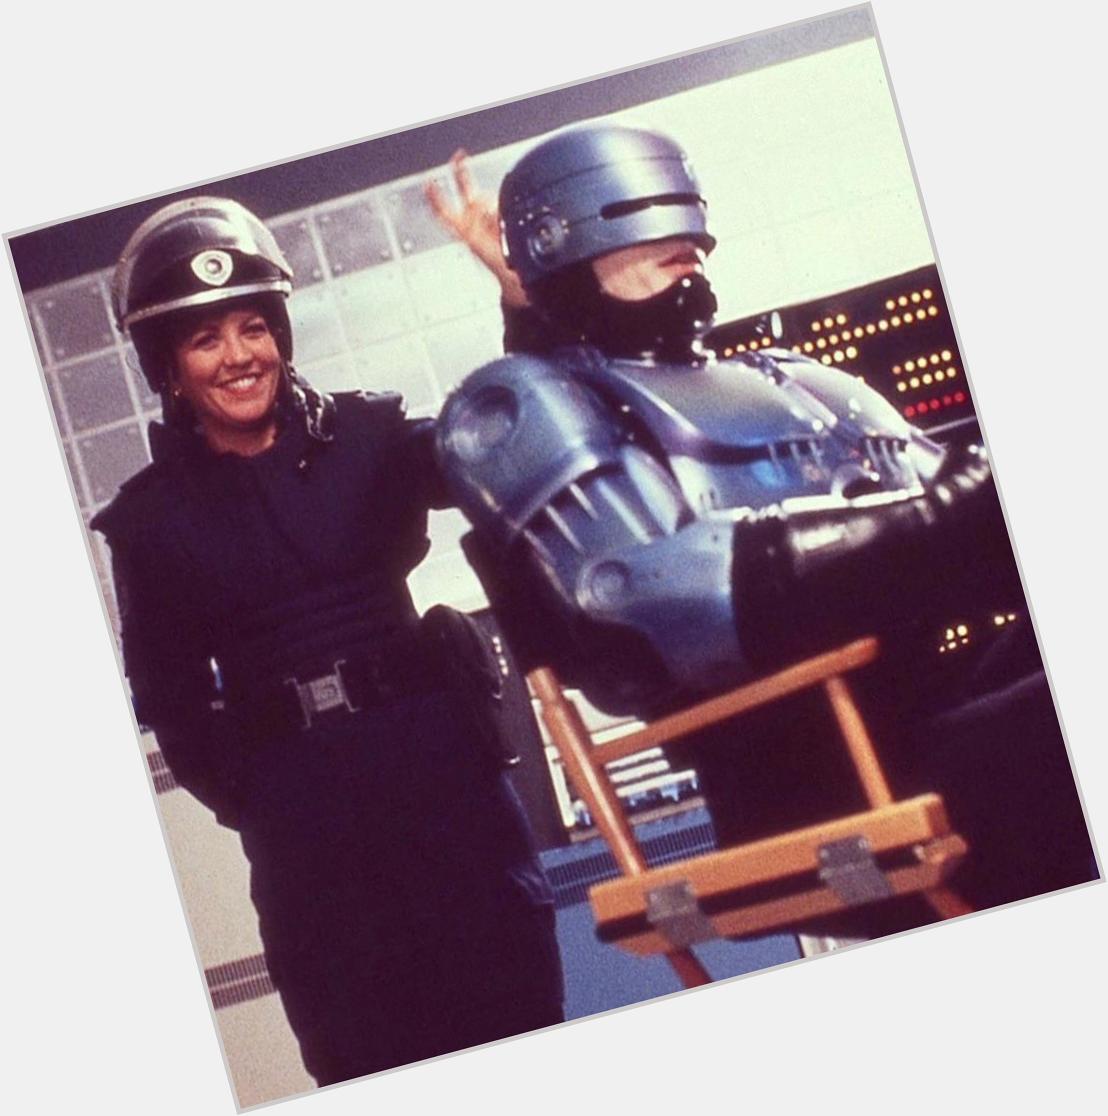 Sometimes, casting hits just right!

Happy Birthday to ROBOCOP stars Peter Weller and Nancy Allen! 